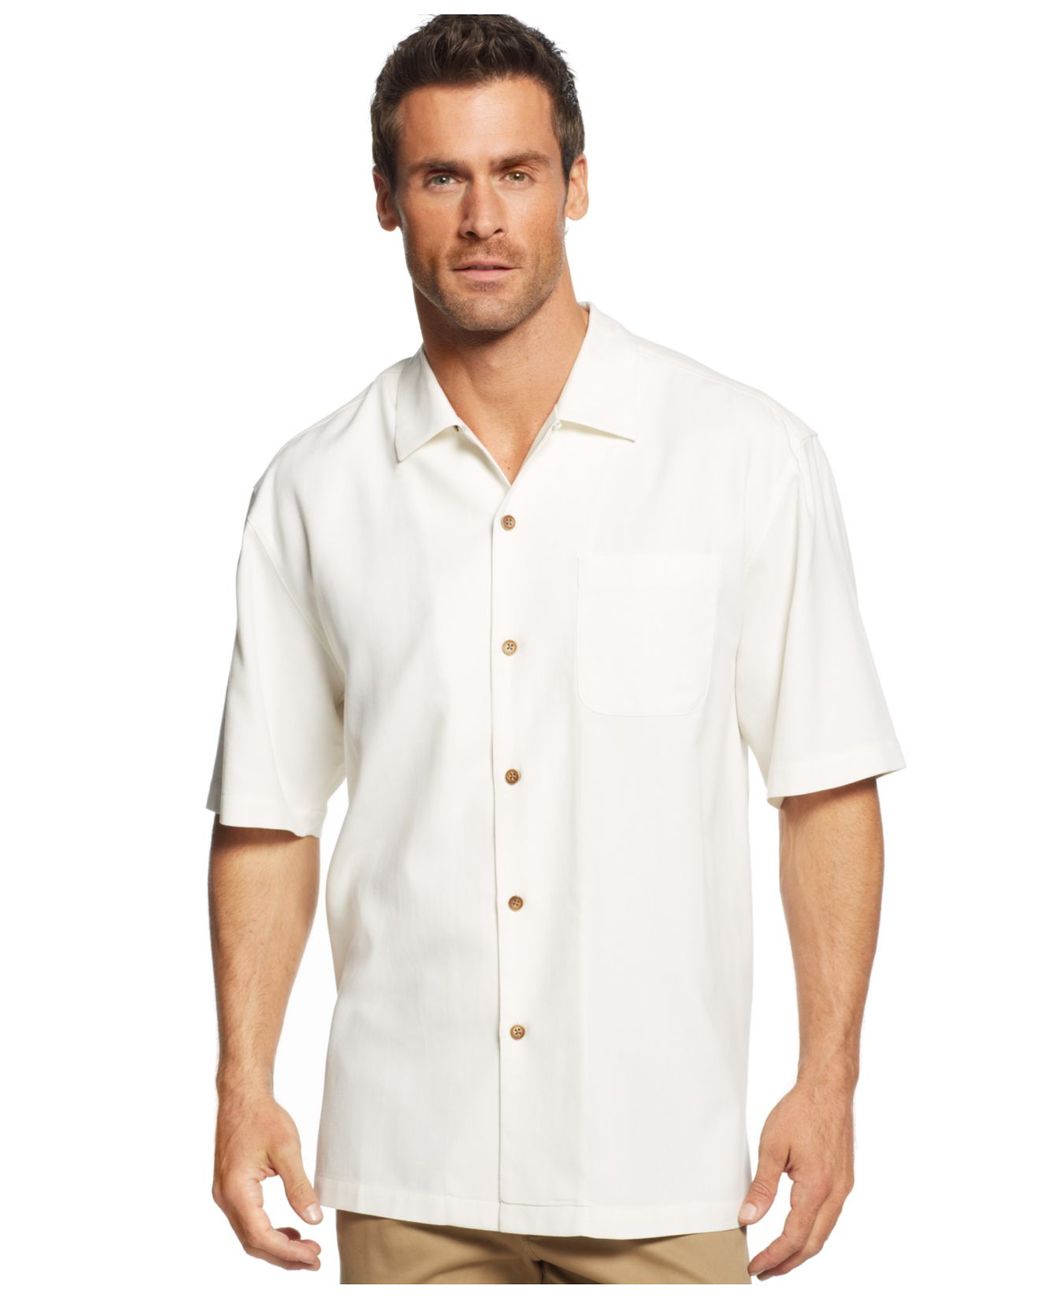 Tommy Bahama Tequila Mocking Parrot Silk Shirt in White for Men